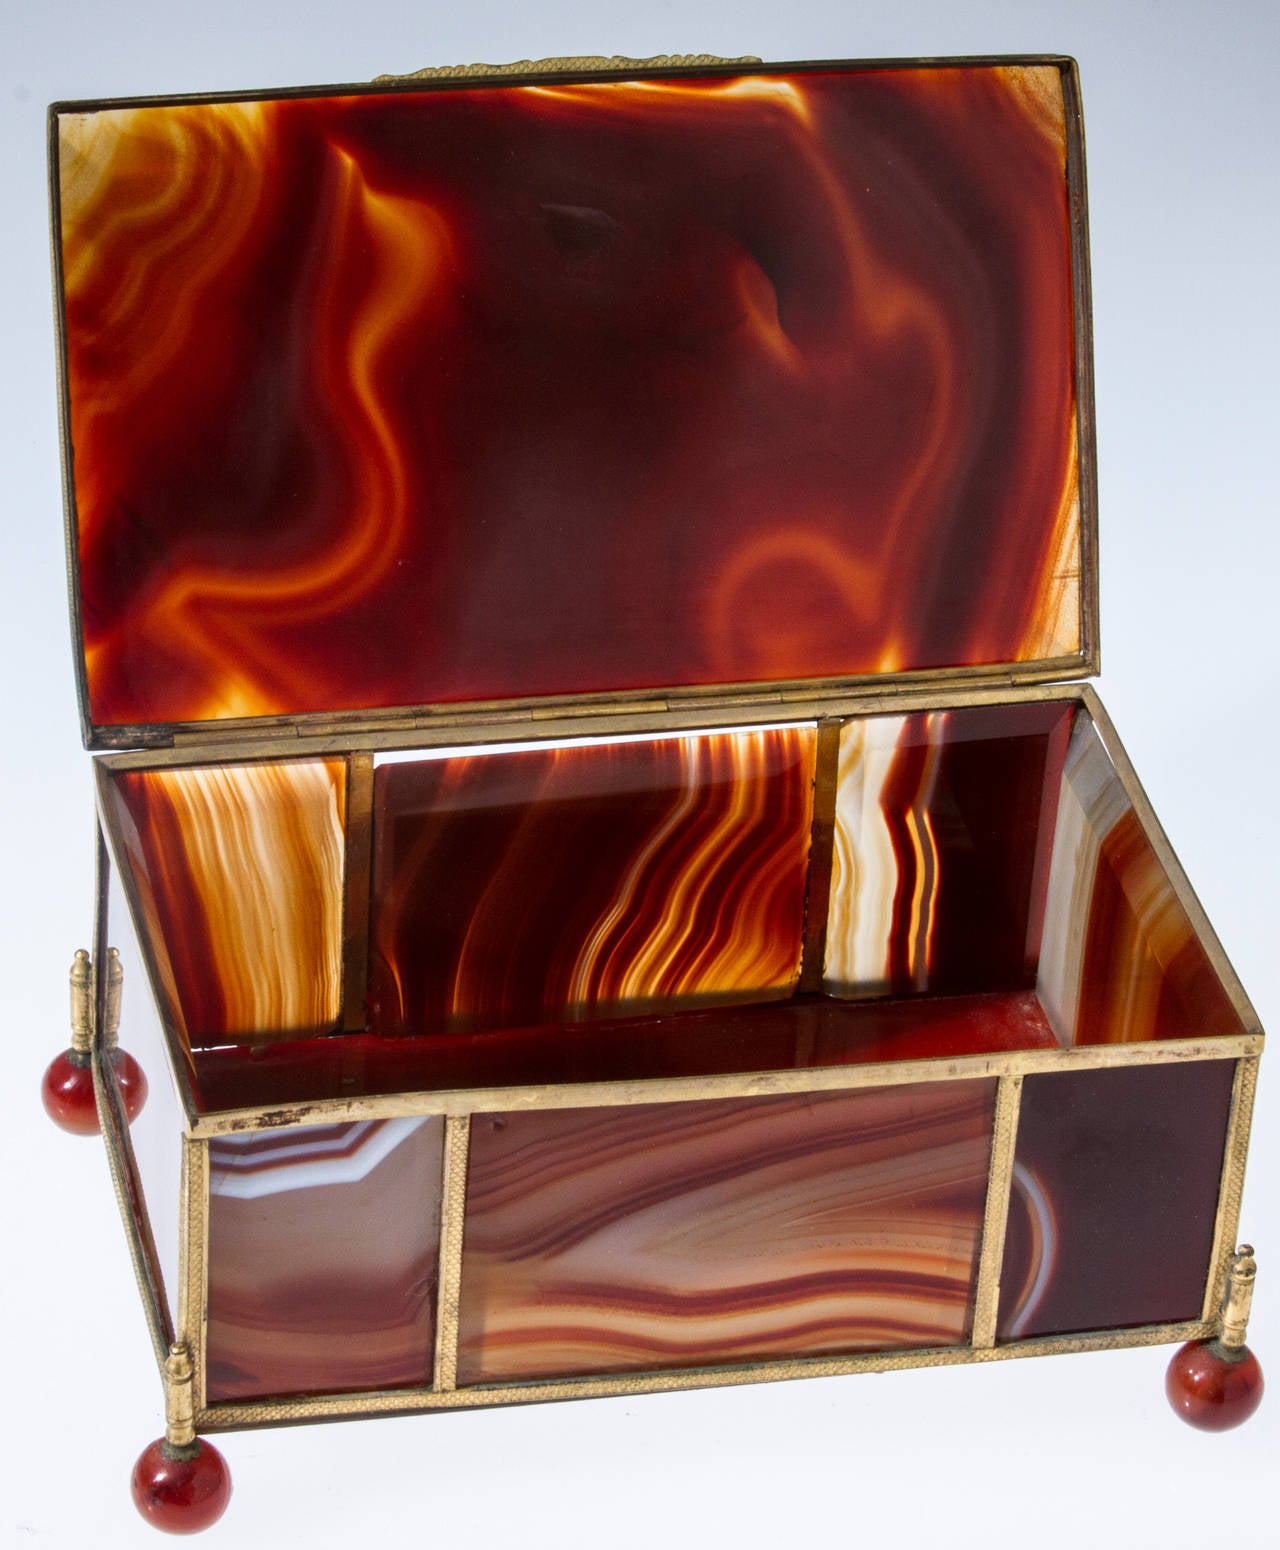 French Large Agate Box with Bronze Dore Fittings